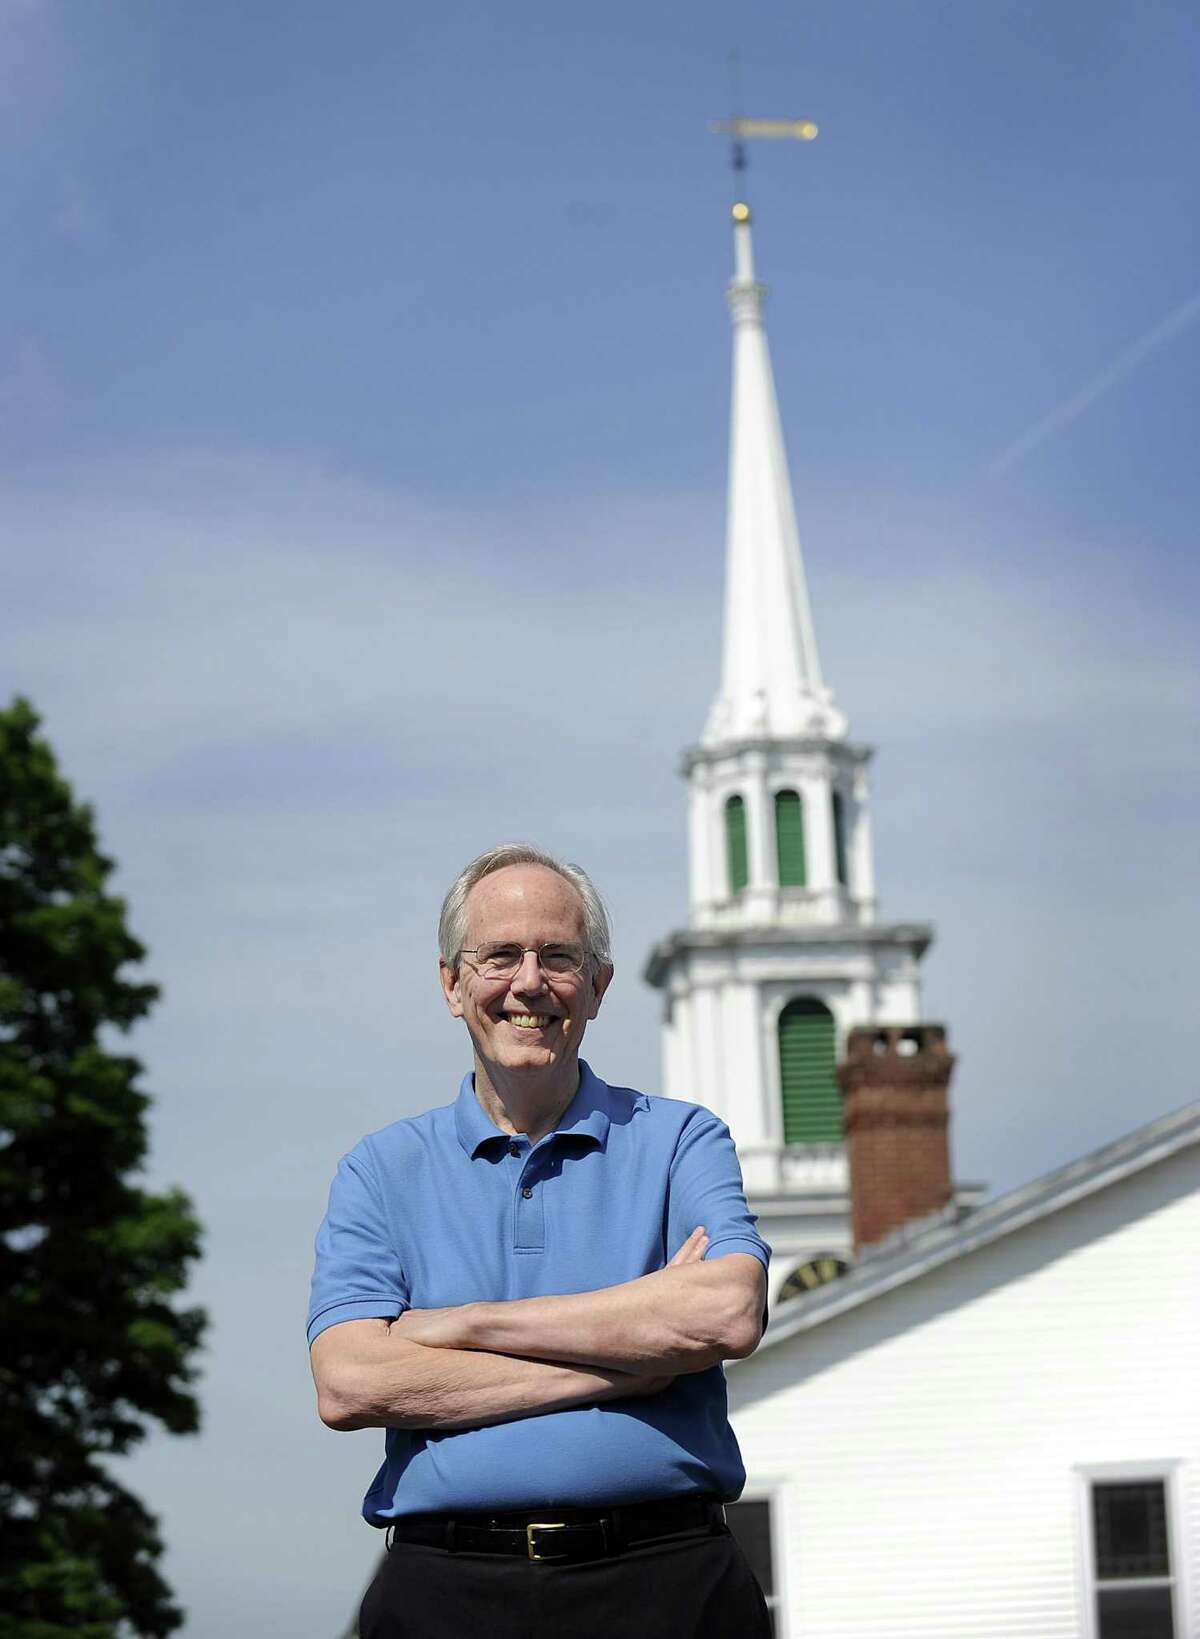 Rev. Michael Moran will be retiring from the First Congregational Church in New Milford after nearly 29 years. His last day is July 1. Photo Monday, June 18, 2018.